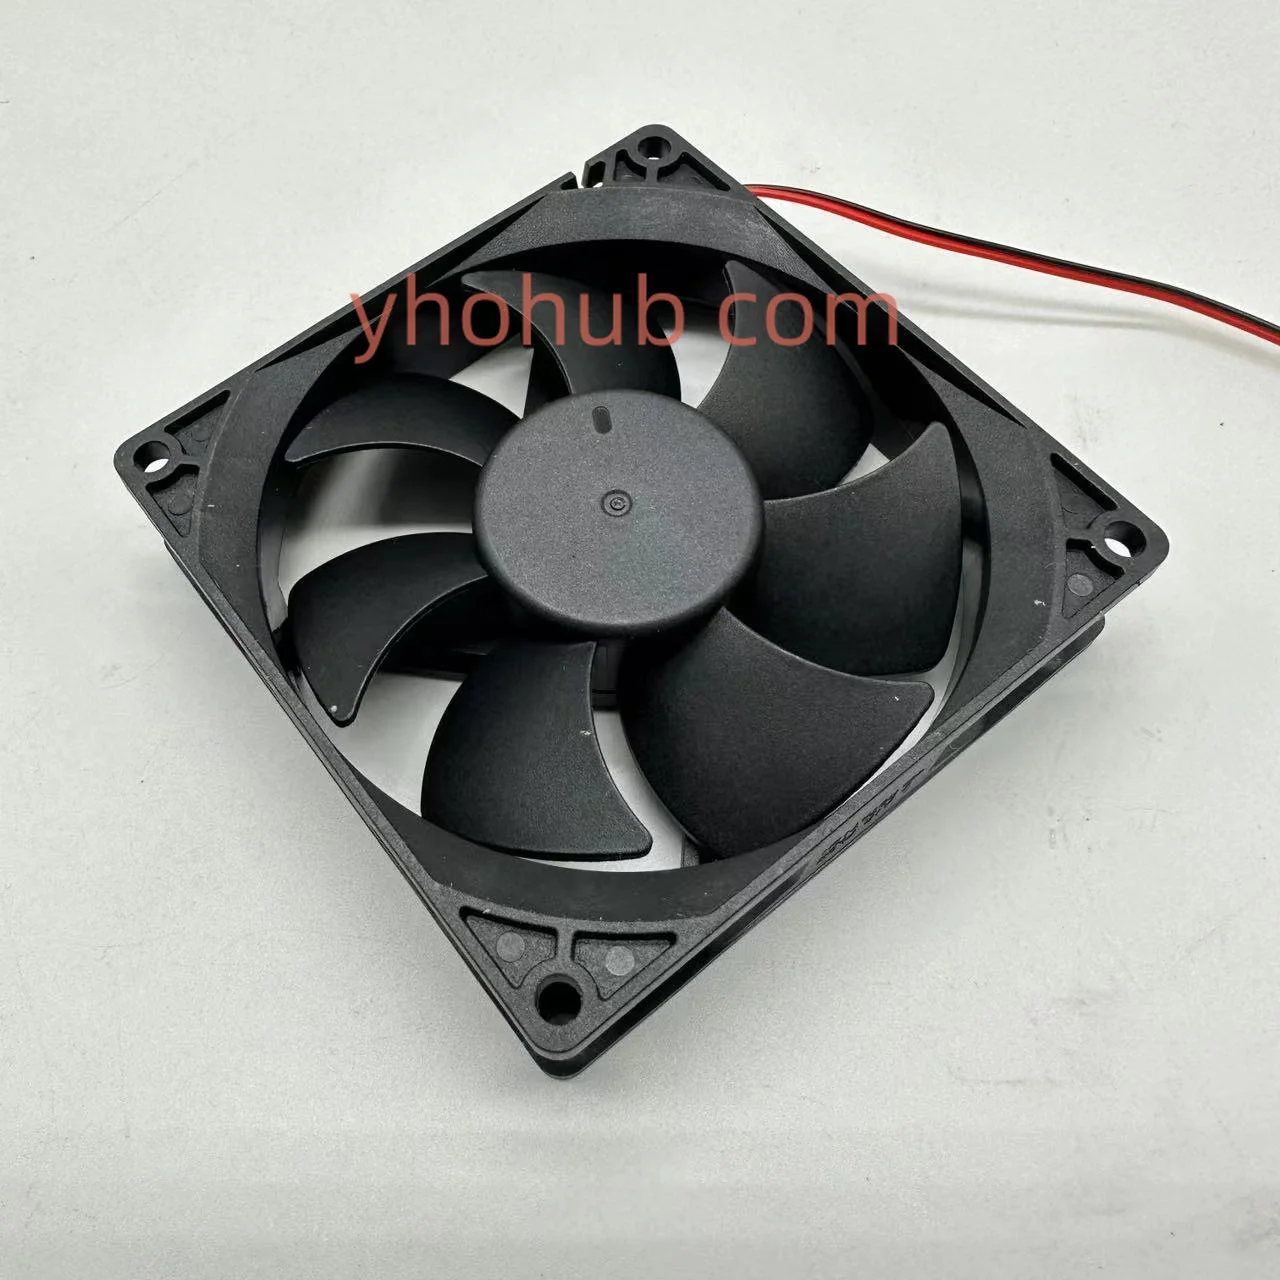 SOMREAL XY9225S DC 24V 0.25A 90x90x25mm 2-Wire Server Cooling Fan